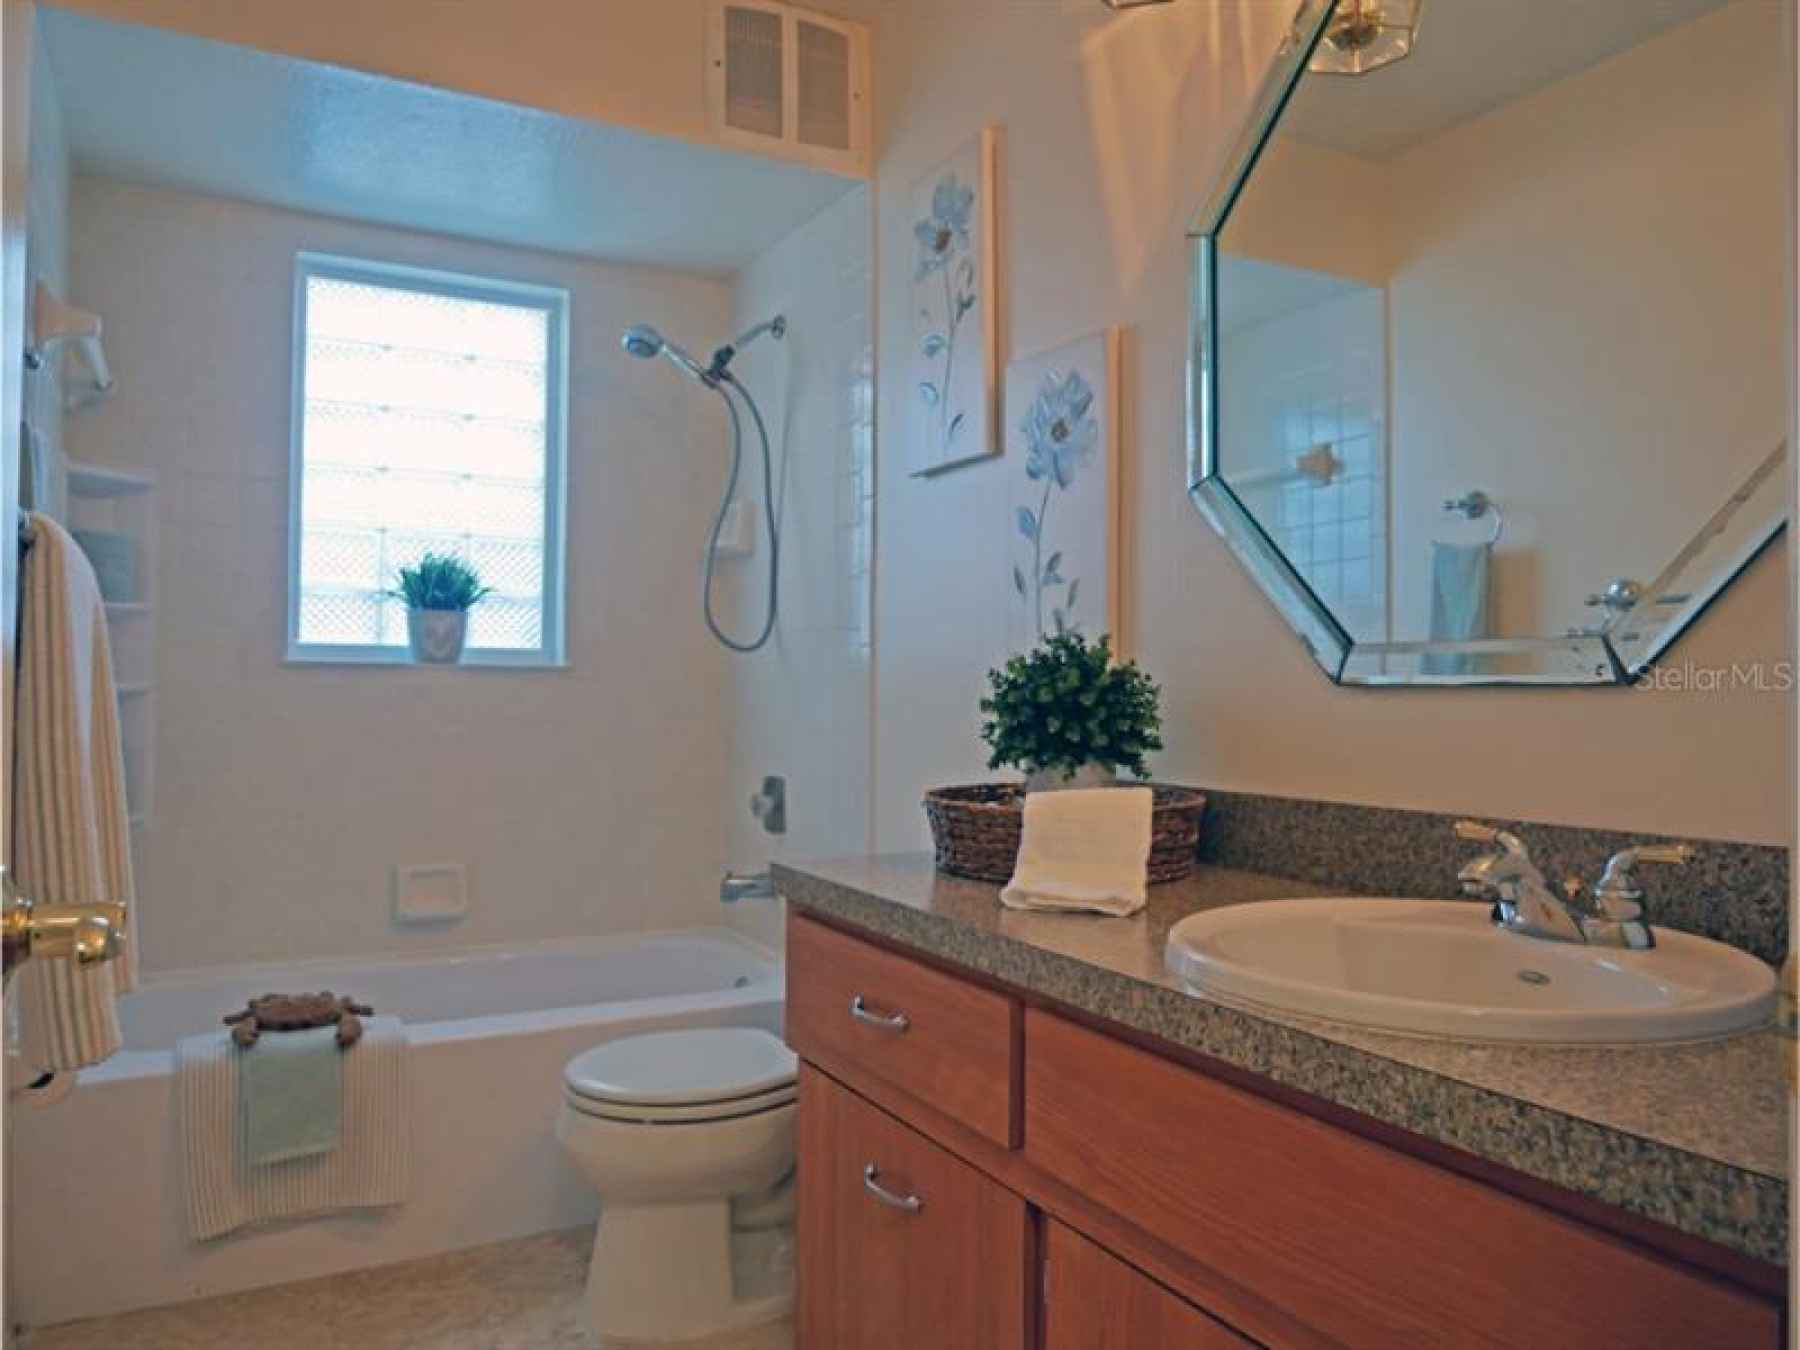 This updated bathroom is in the hall and in between the 3rd and 4th bedrooms